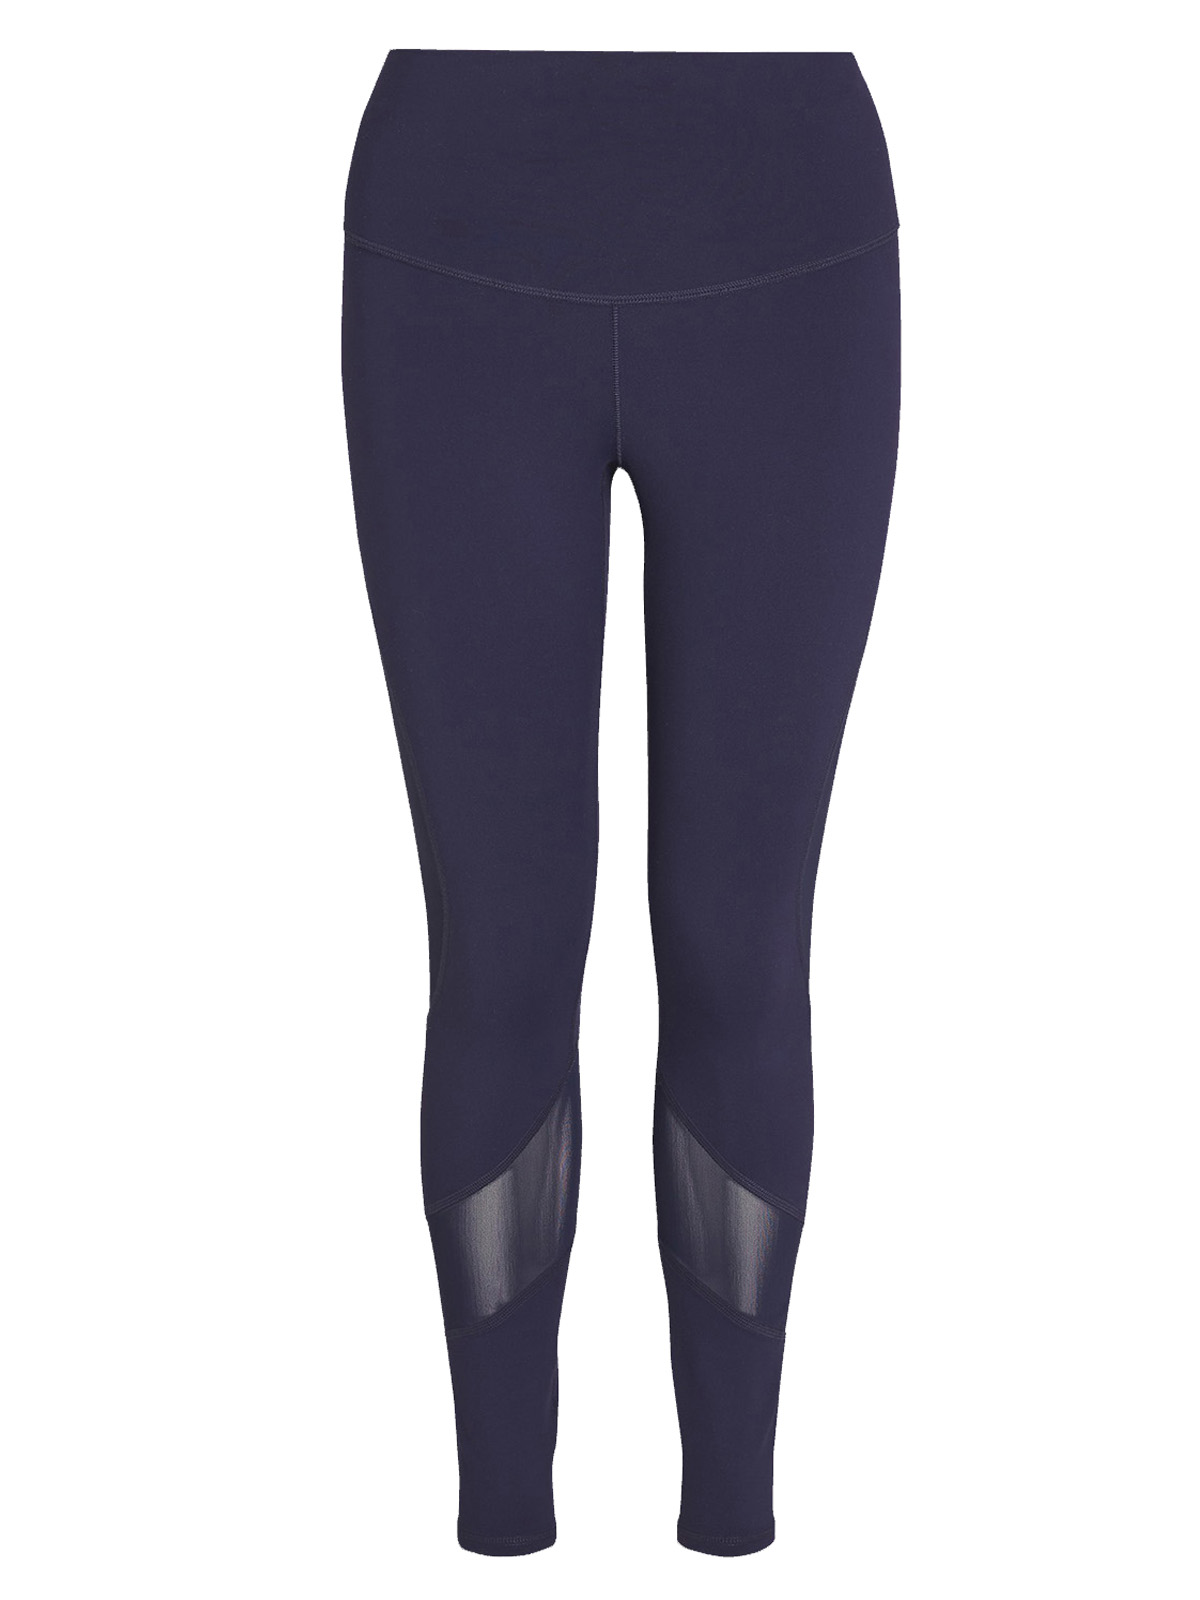 N3XT ASSORTED Sports Leggings - Size 6 to 20